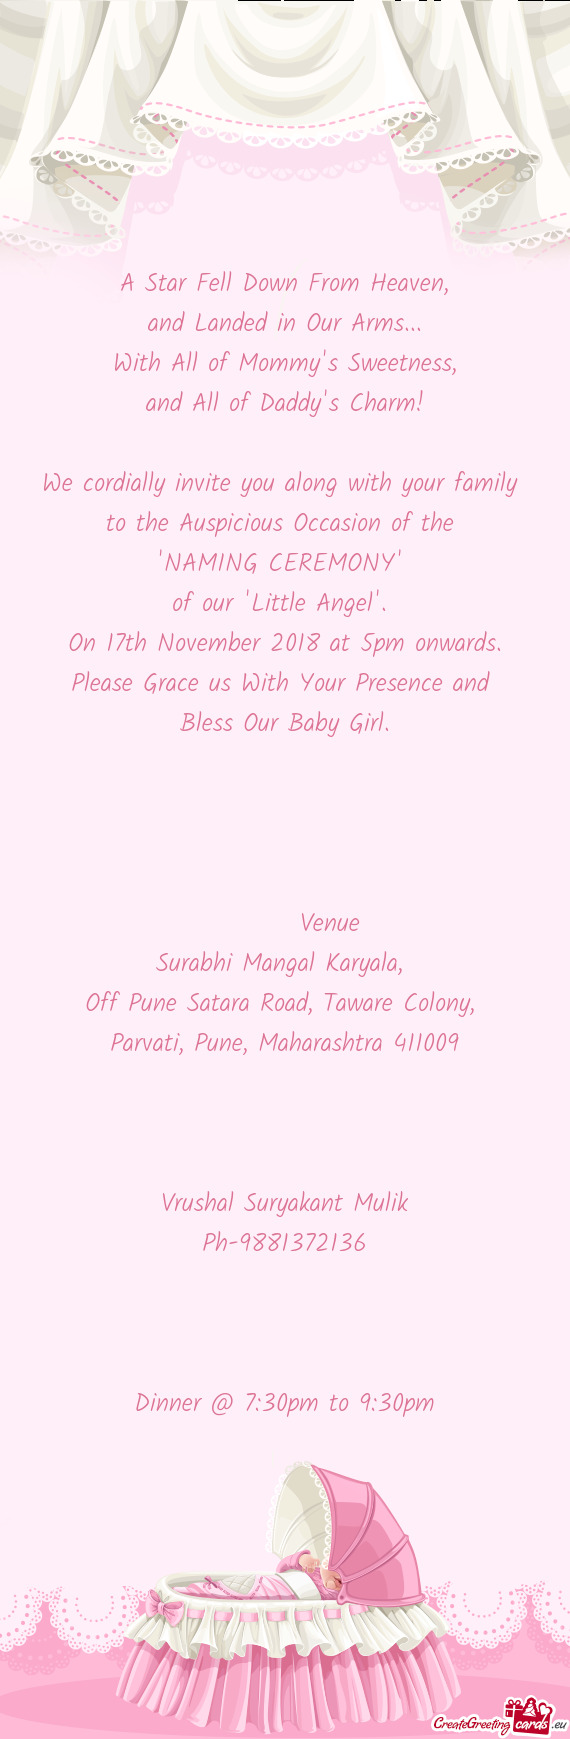 We cordially invite you along with your family